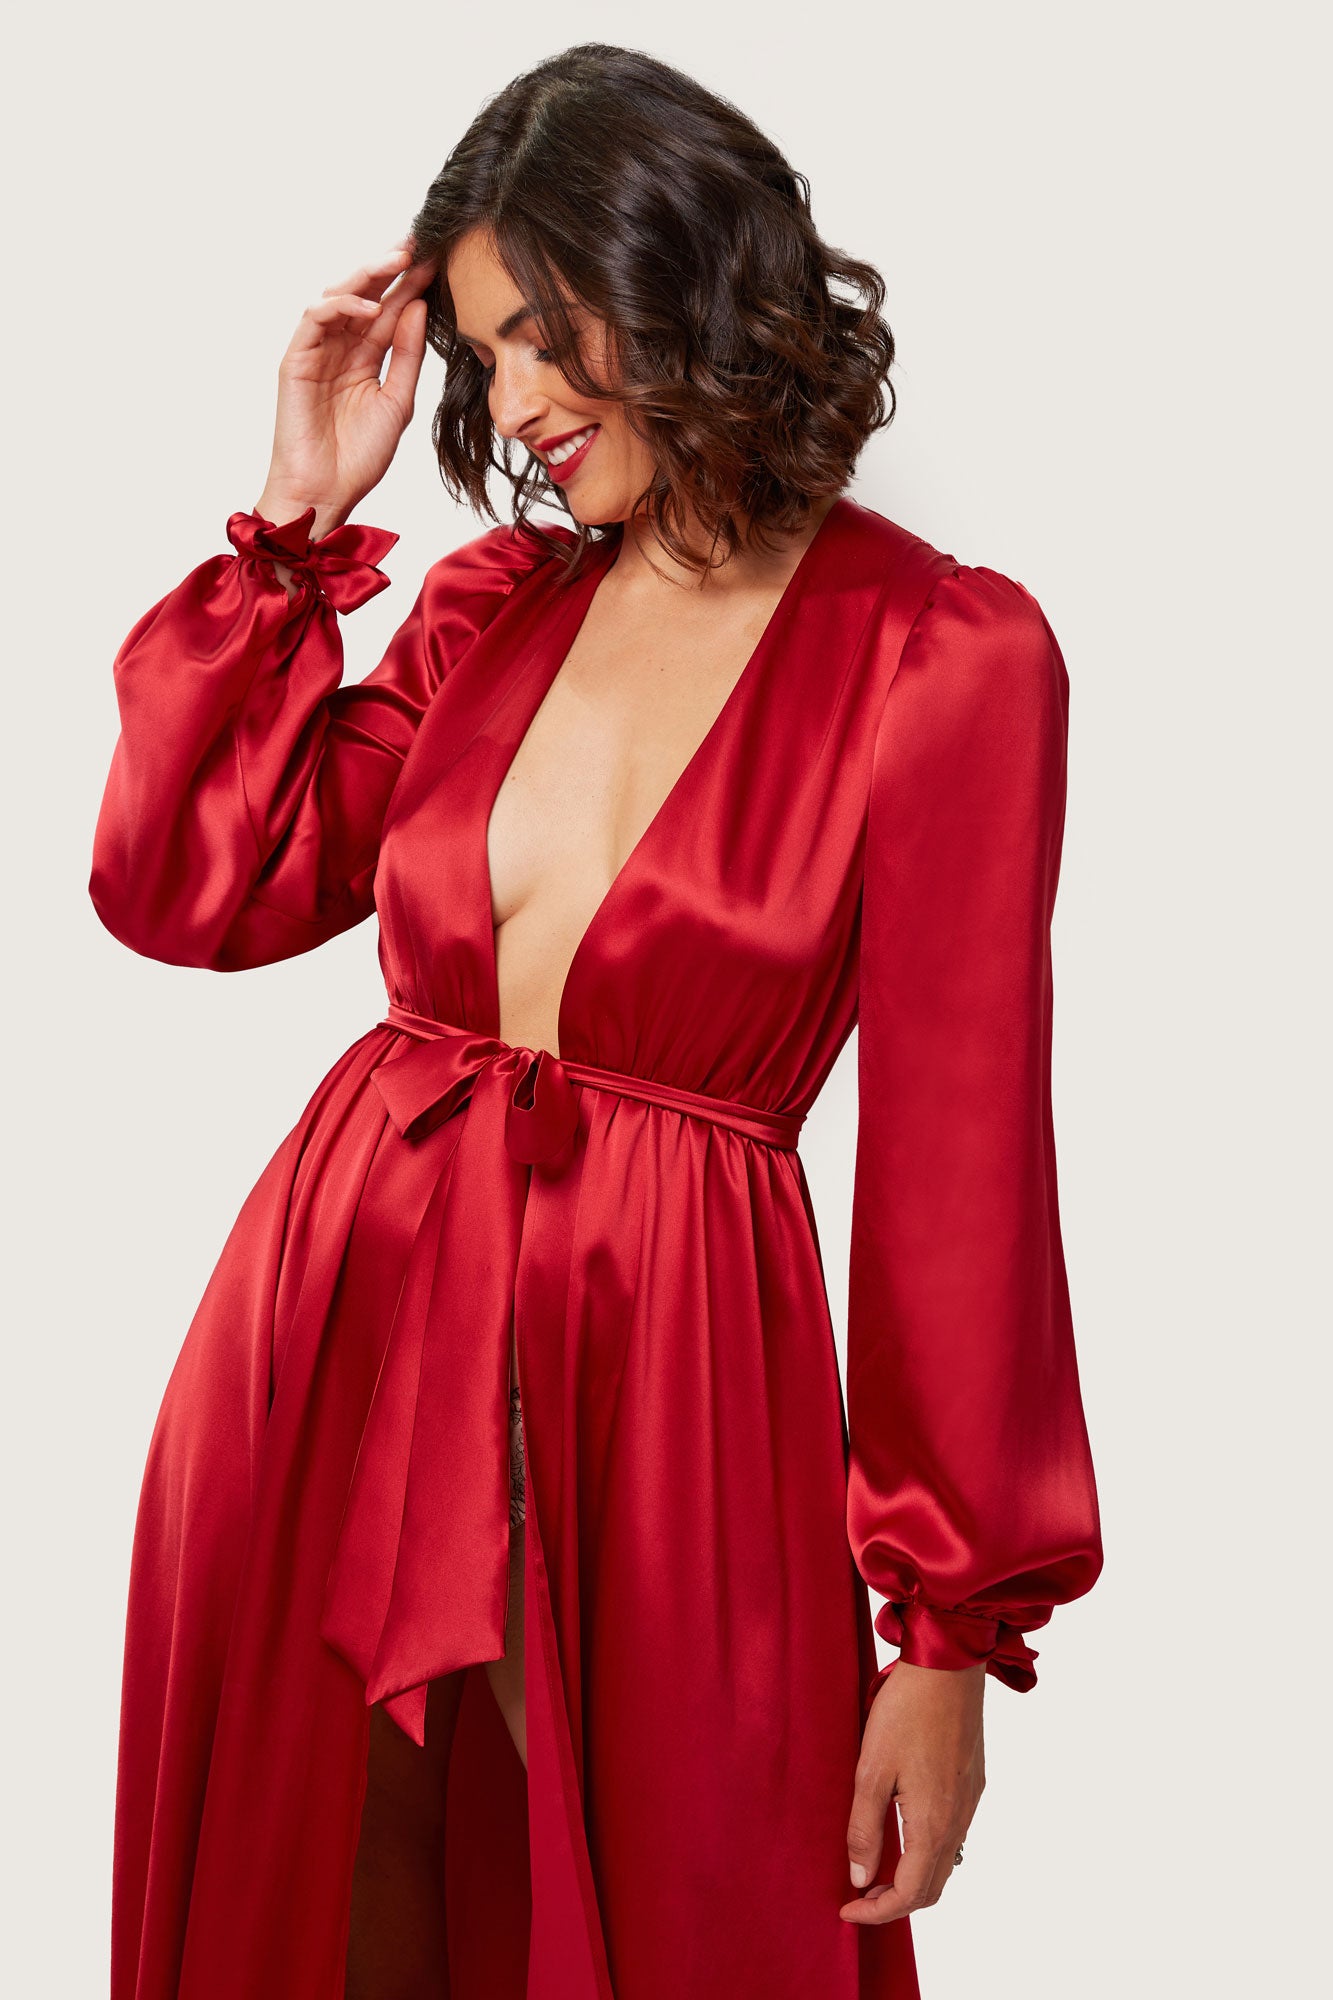 Luxury, floor-length robes and silk dressing gowns